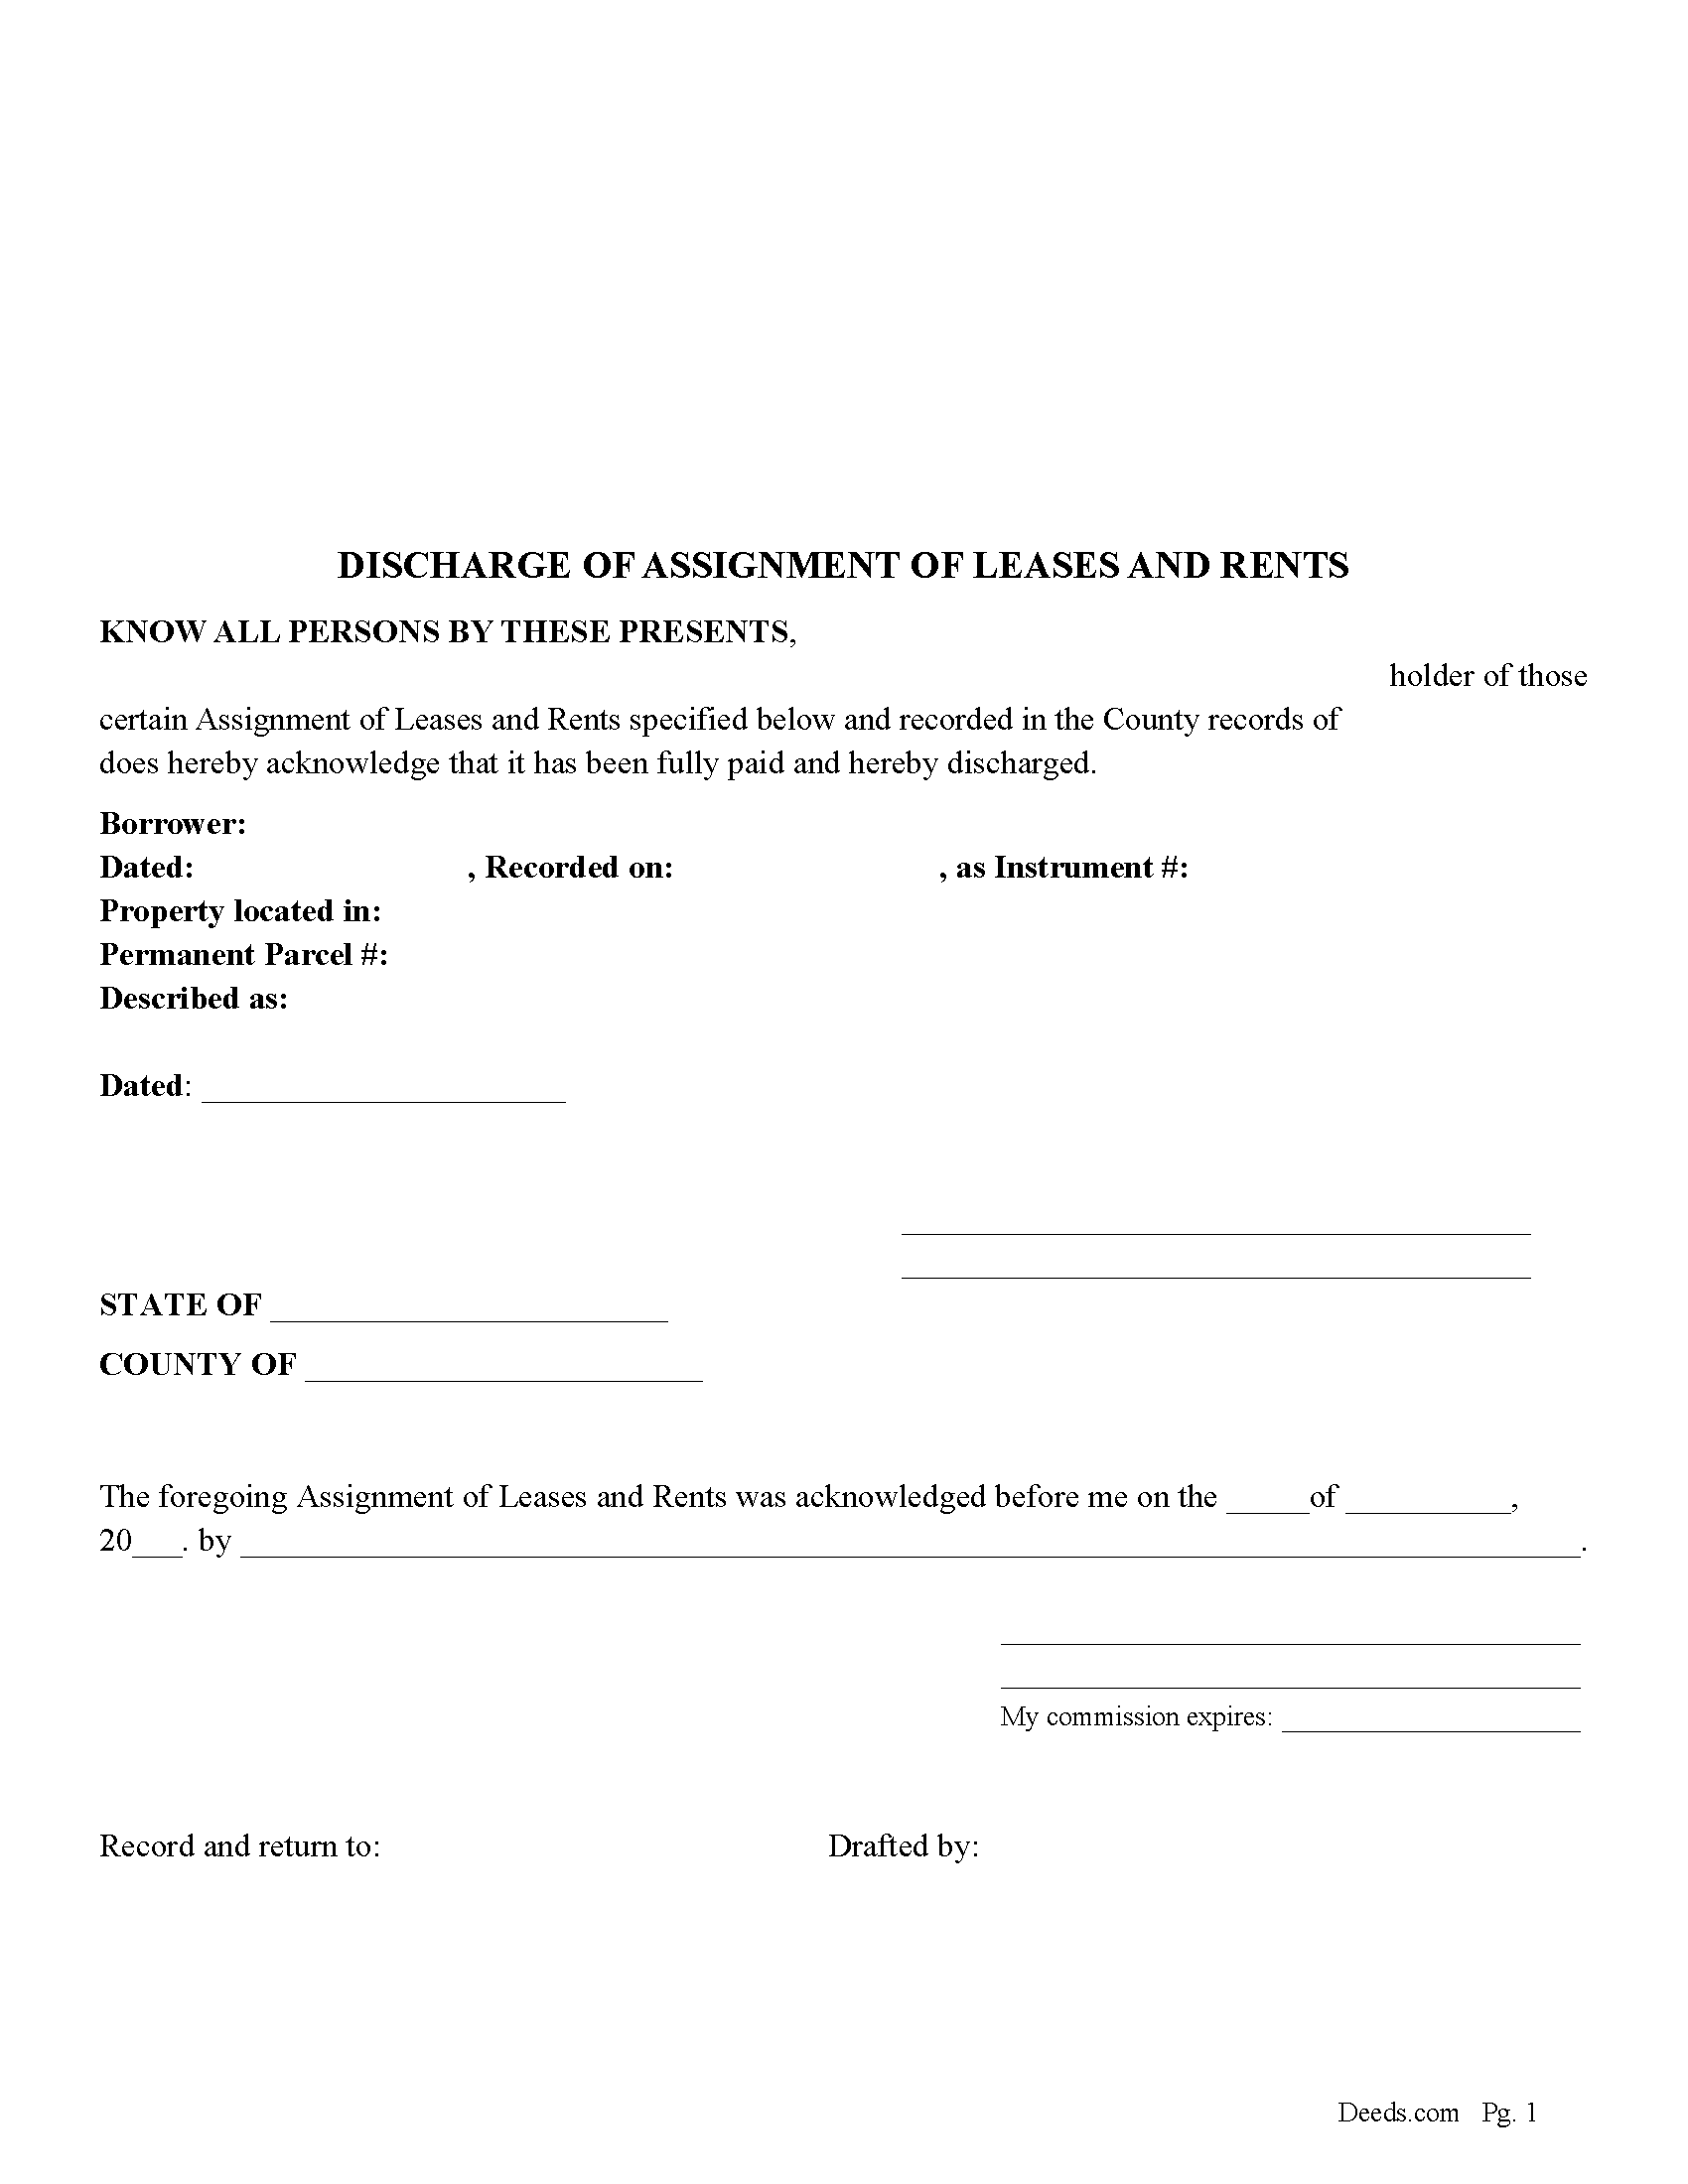 what is termination of assignment of leases and rents